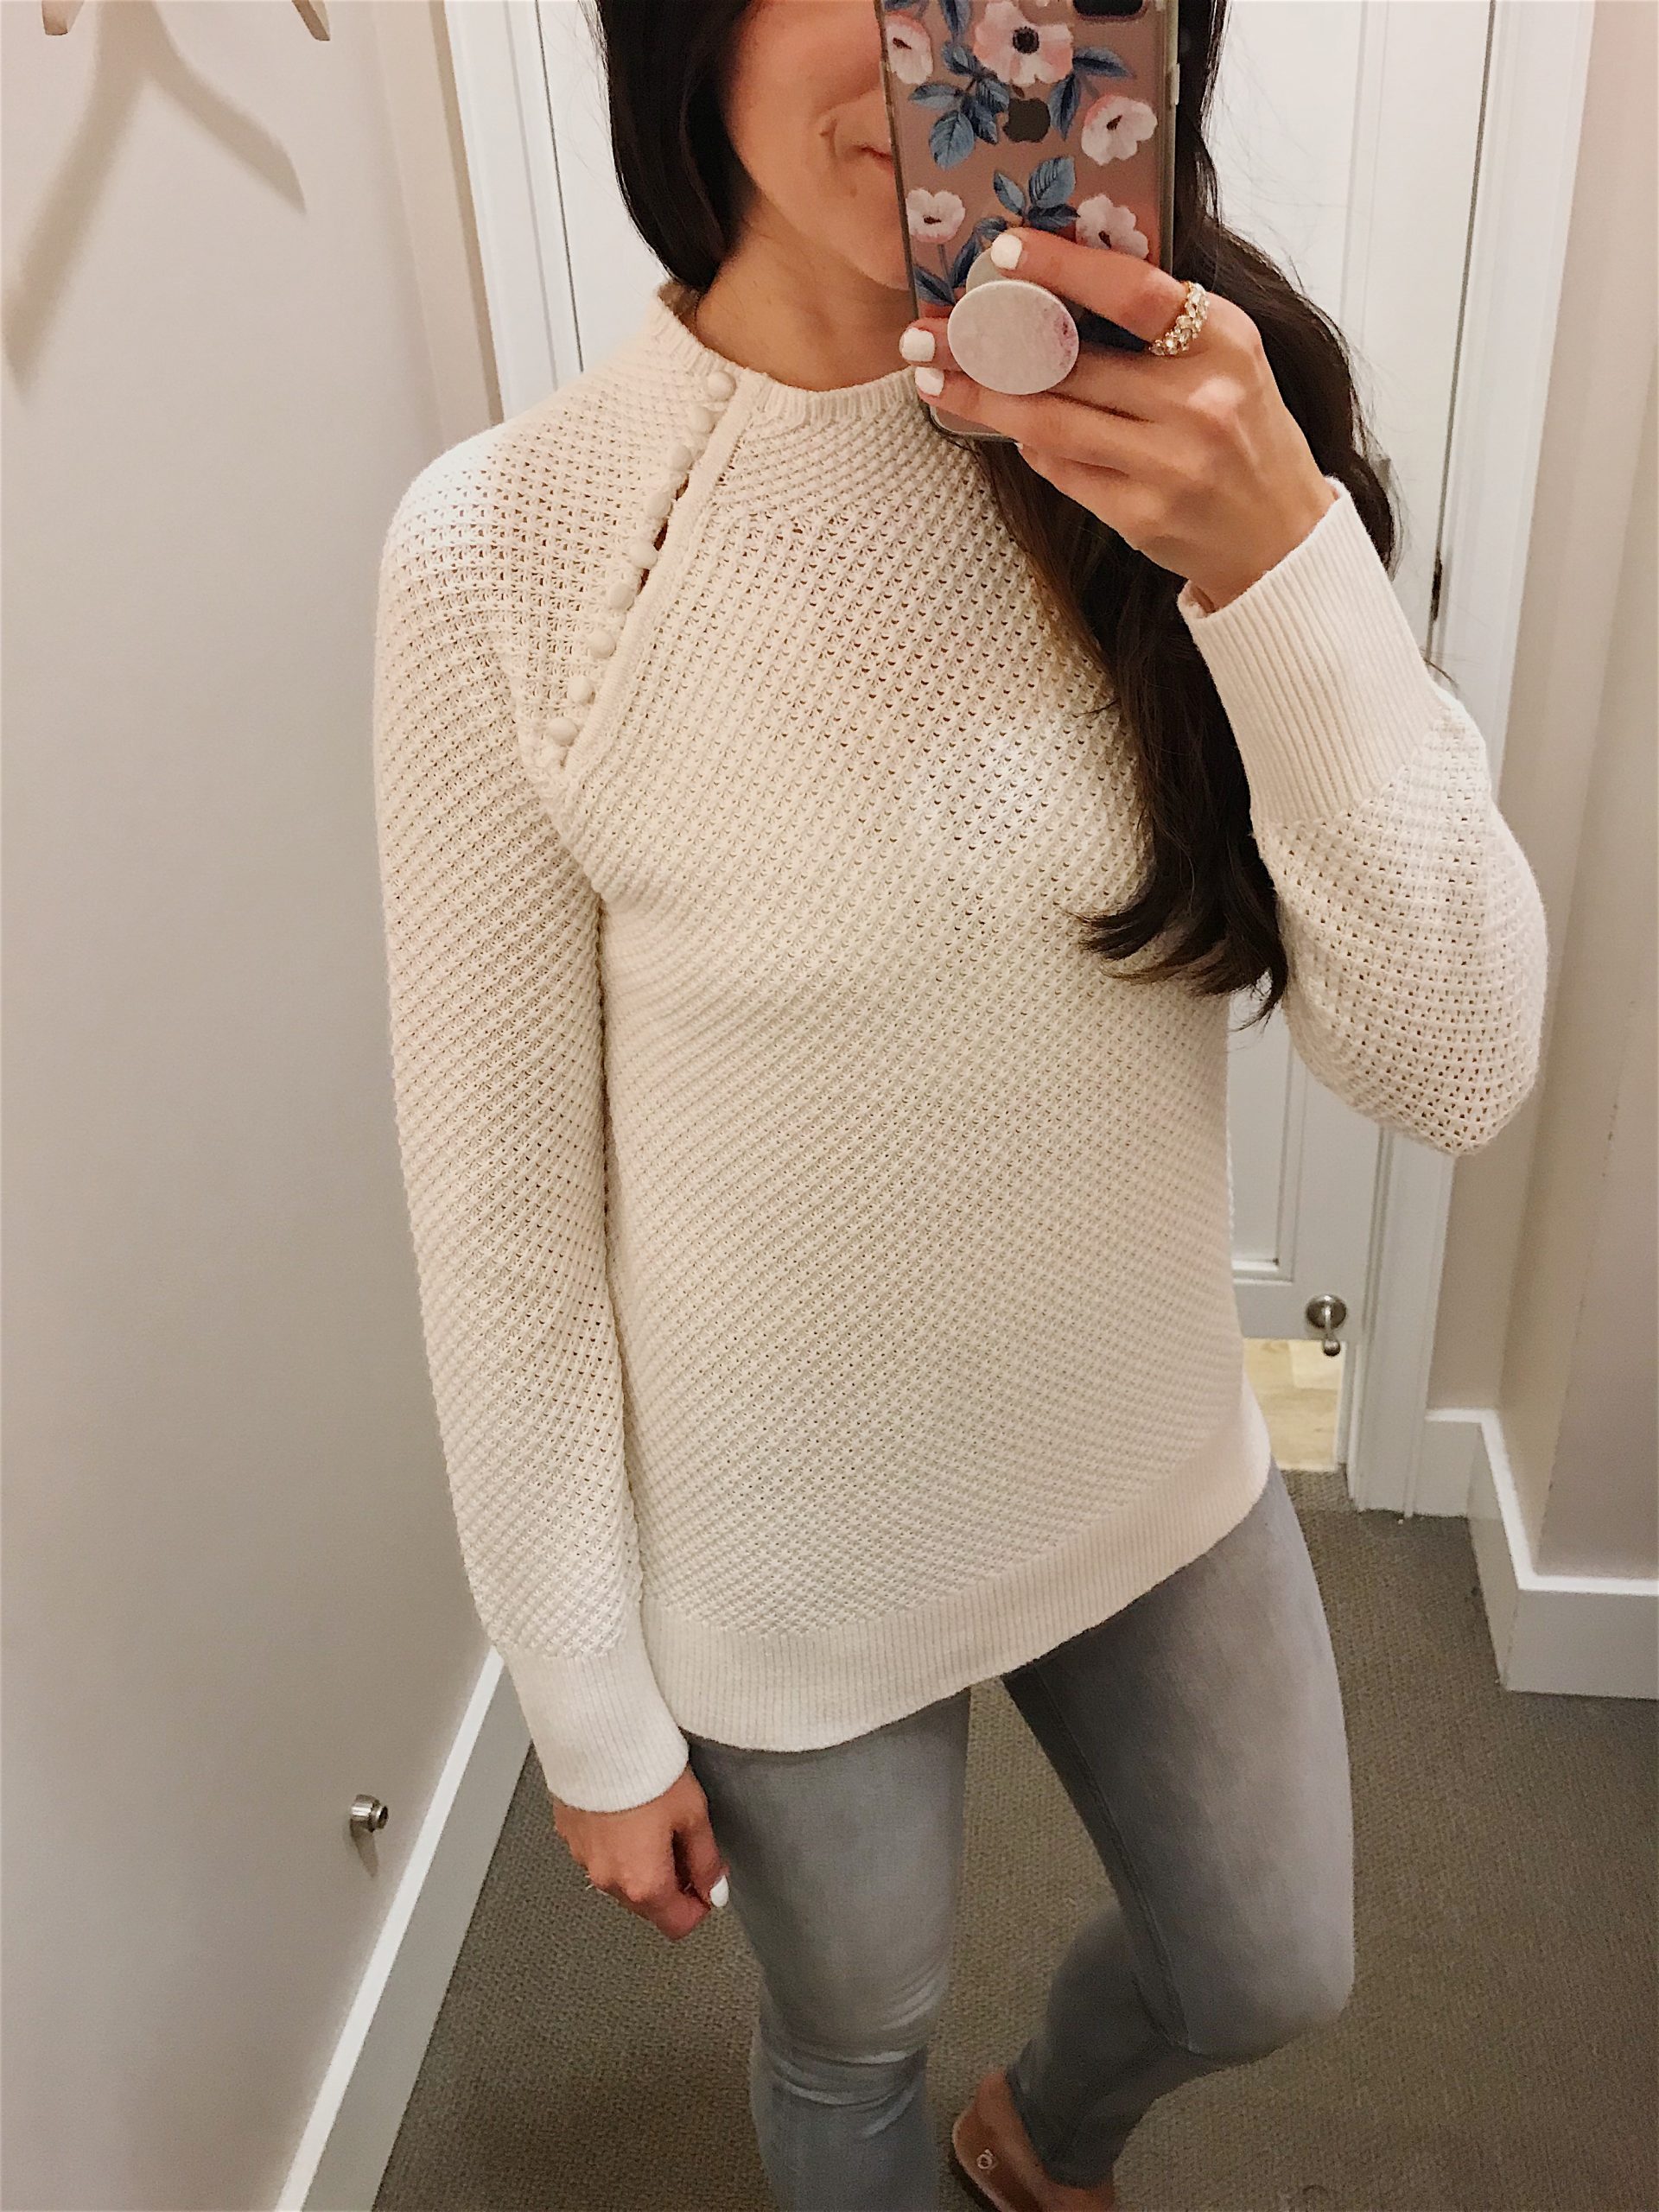 white cozy mock neck sweater in cute fall outfit for fall